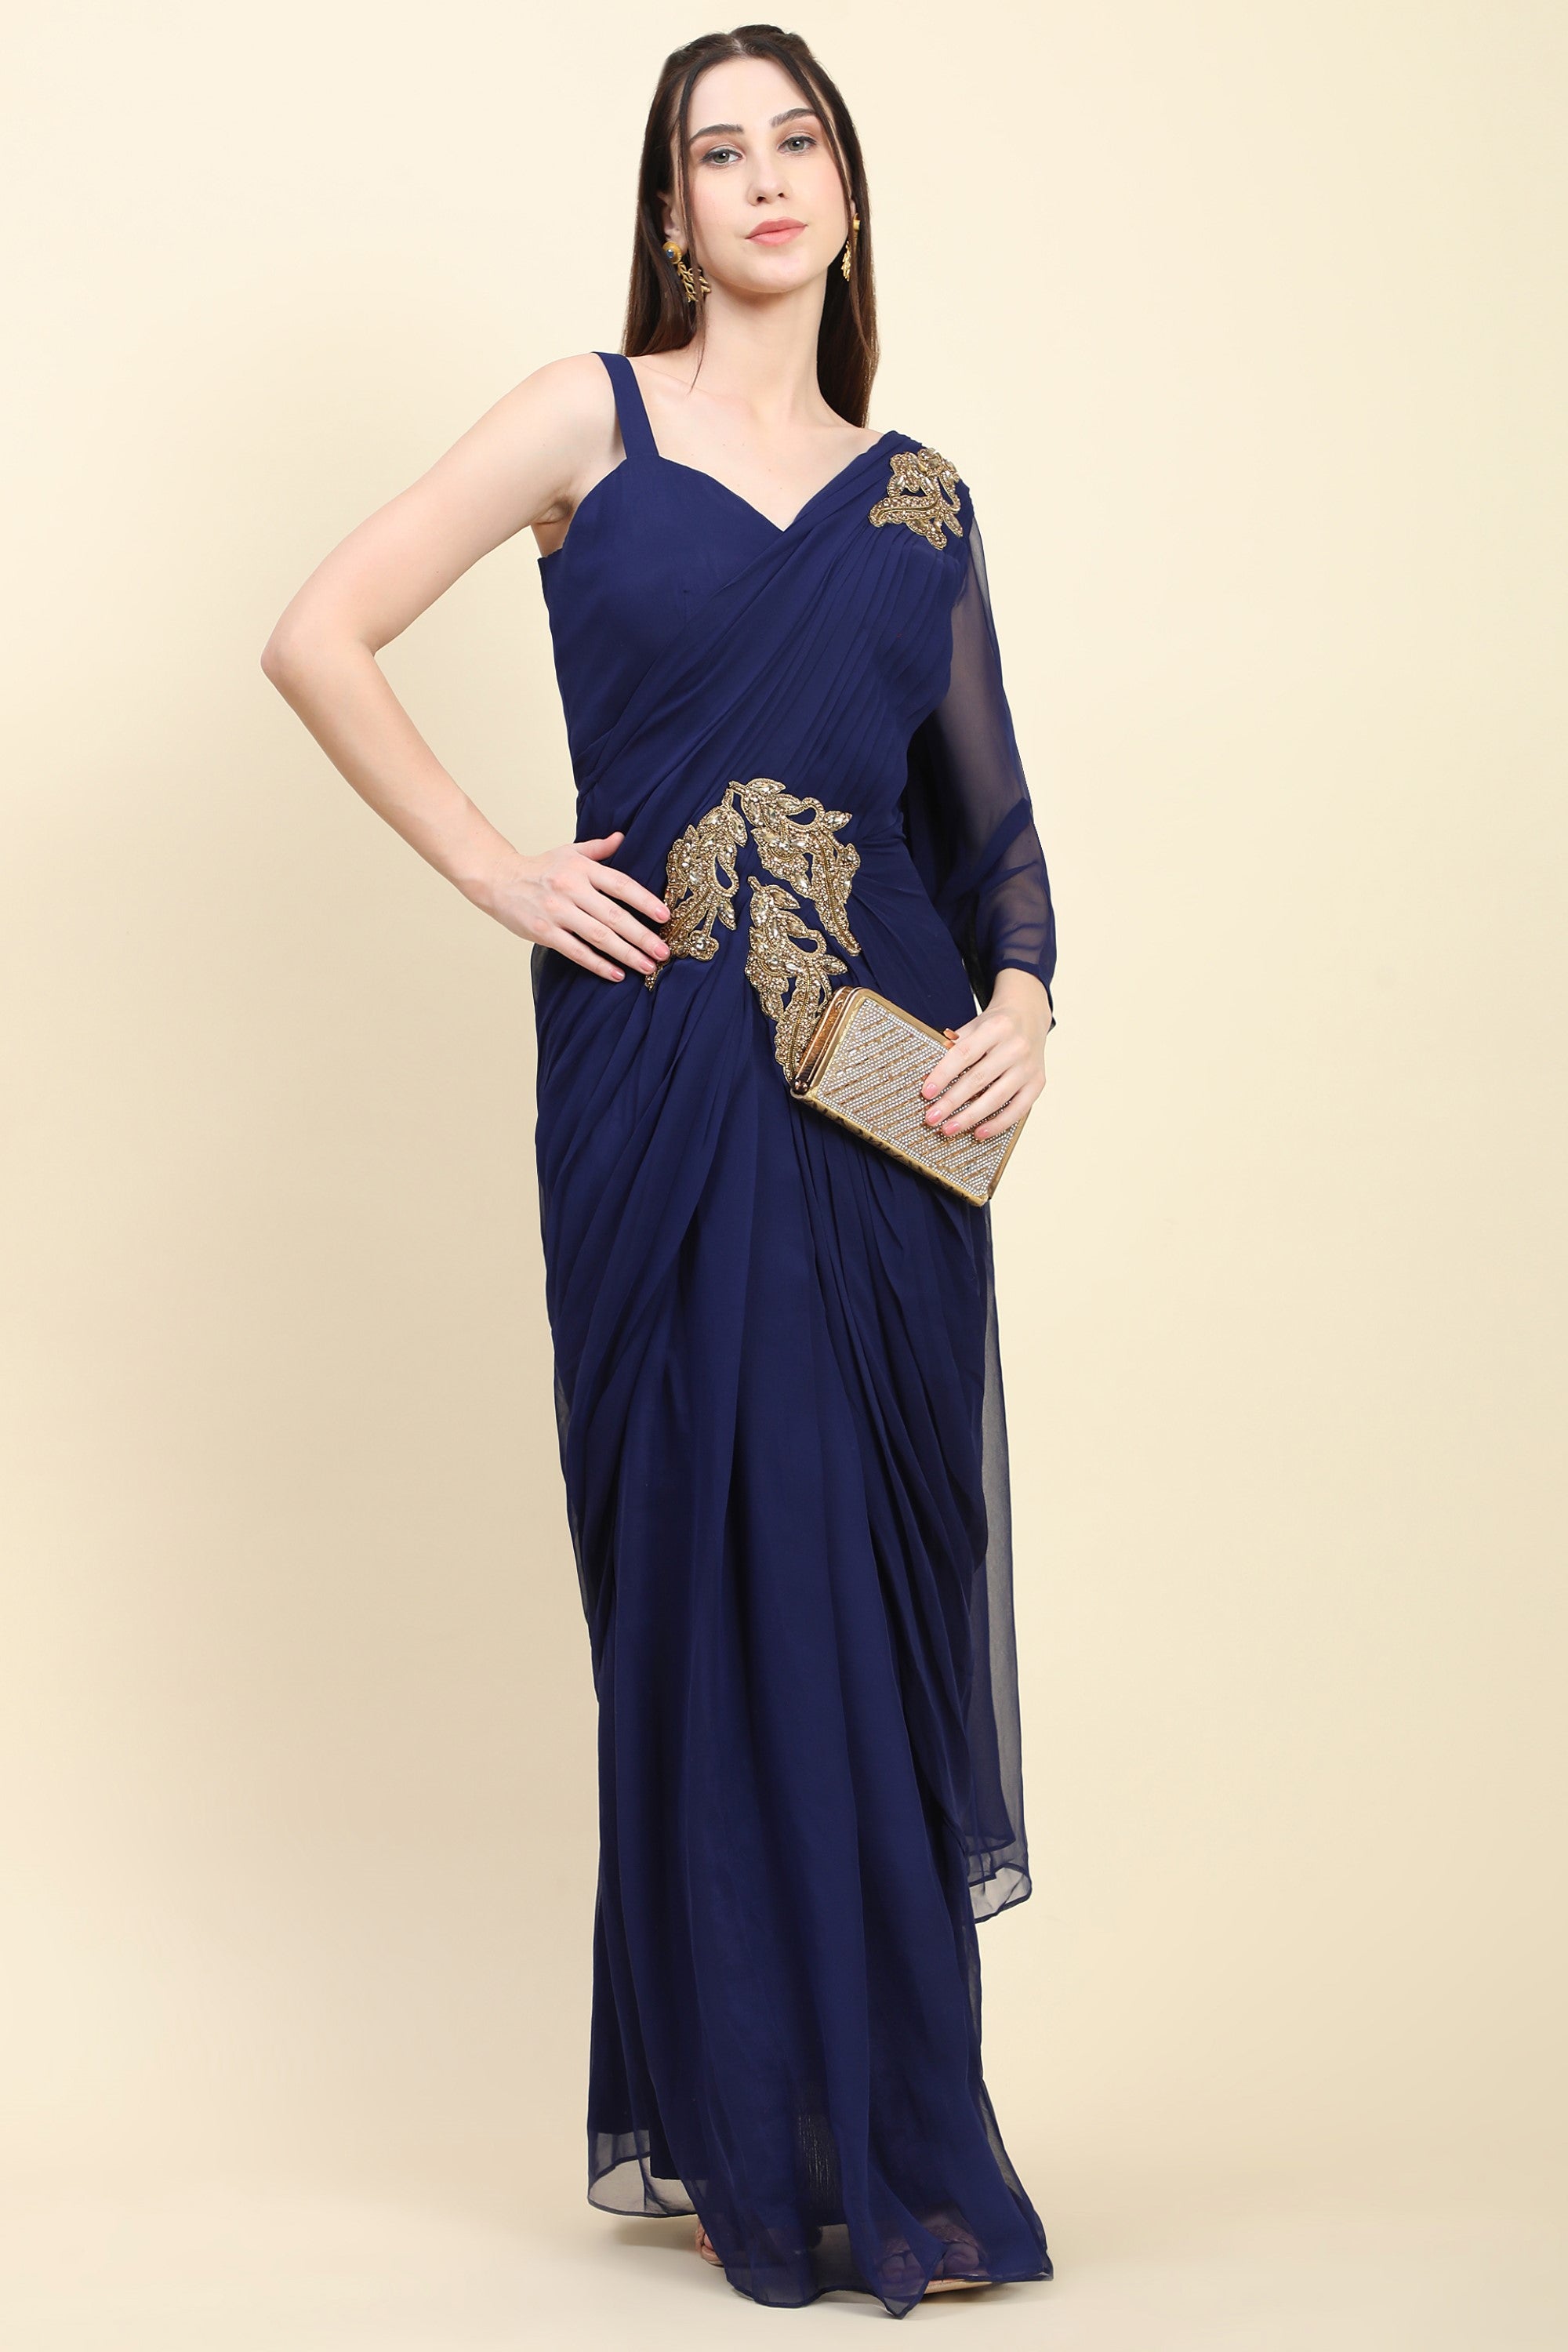 Women's Dark Blue Georgette Pleats Drape Saree, Blouse set with embroidered patches - MIRACOLOS by Ruchi